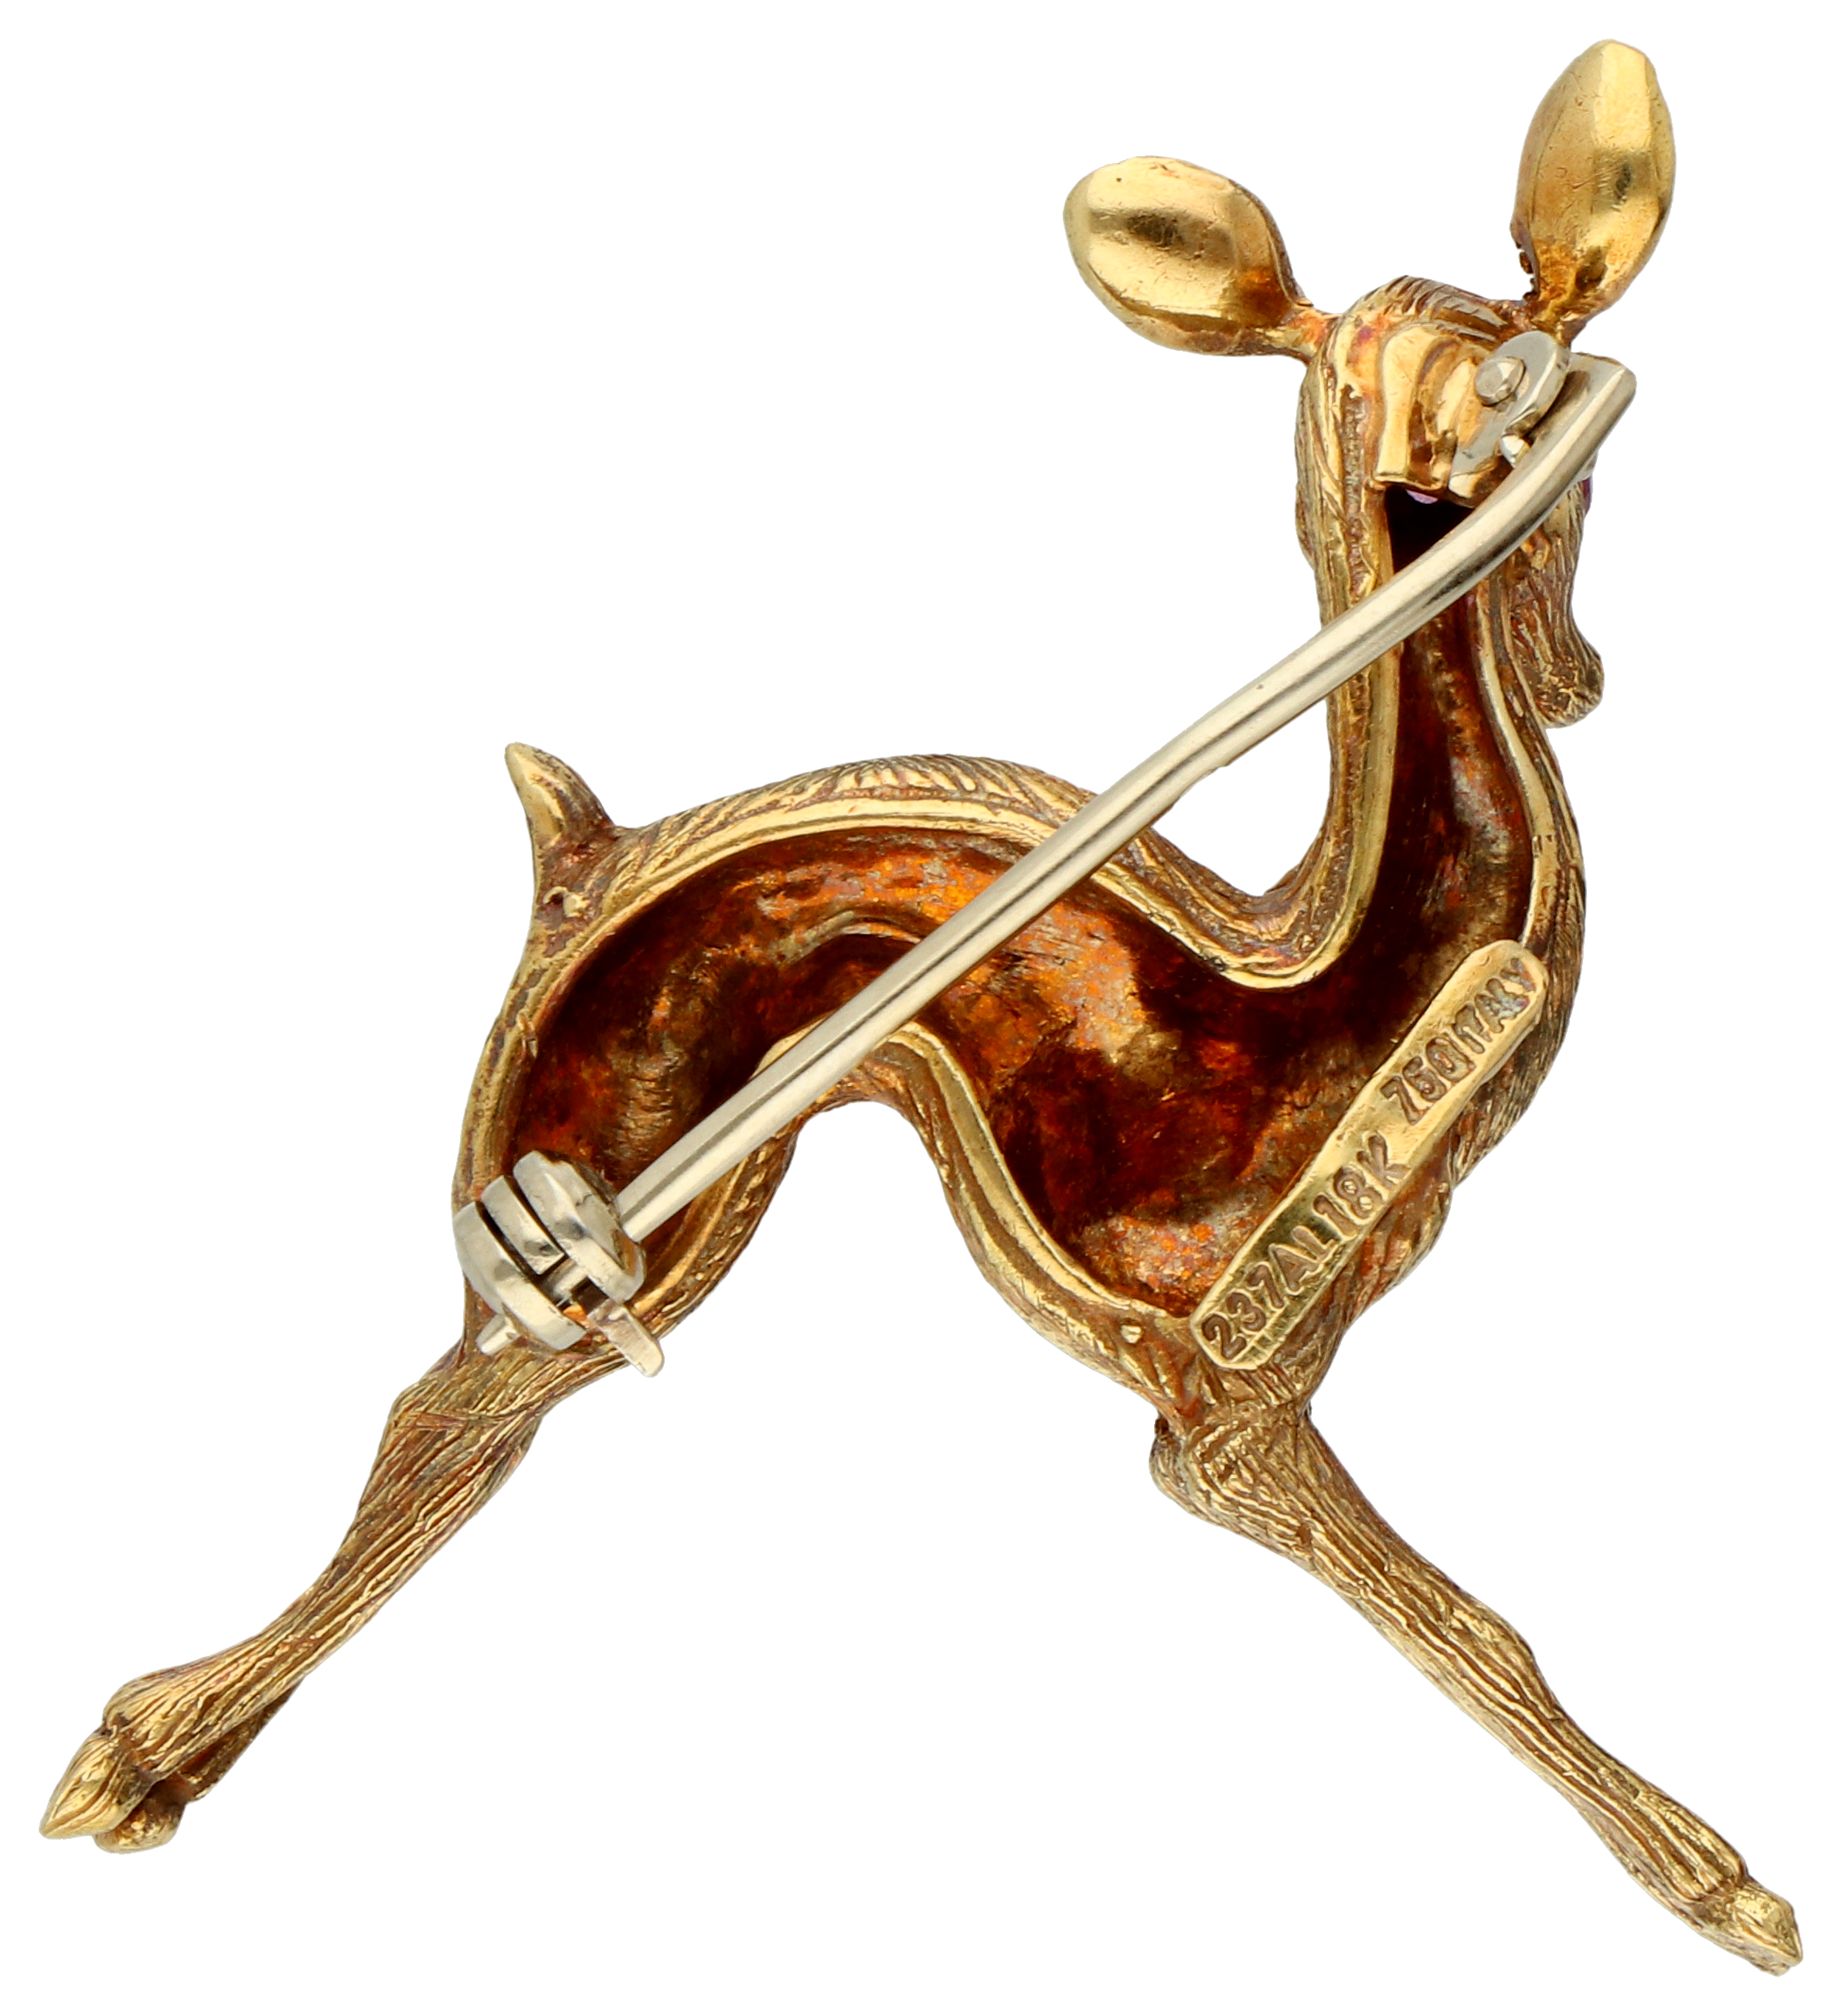 No Reserve - 18K Yellow Gold brooch of a deer with pink stone. - Image 2 of 3